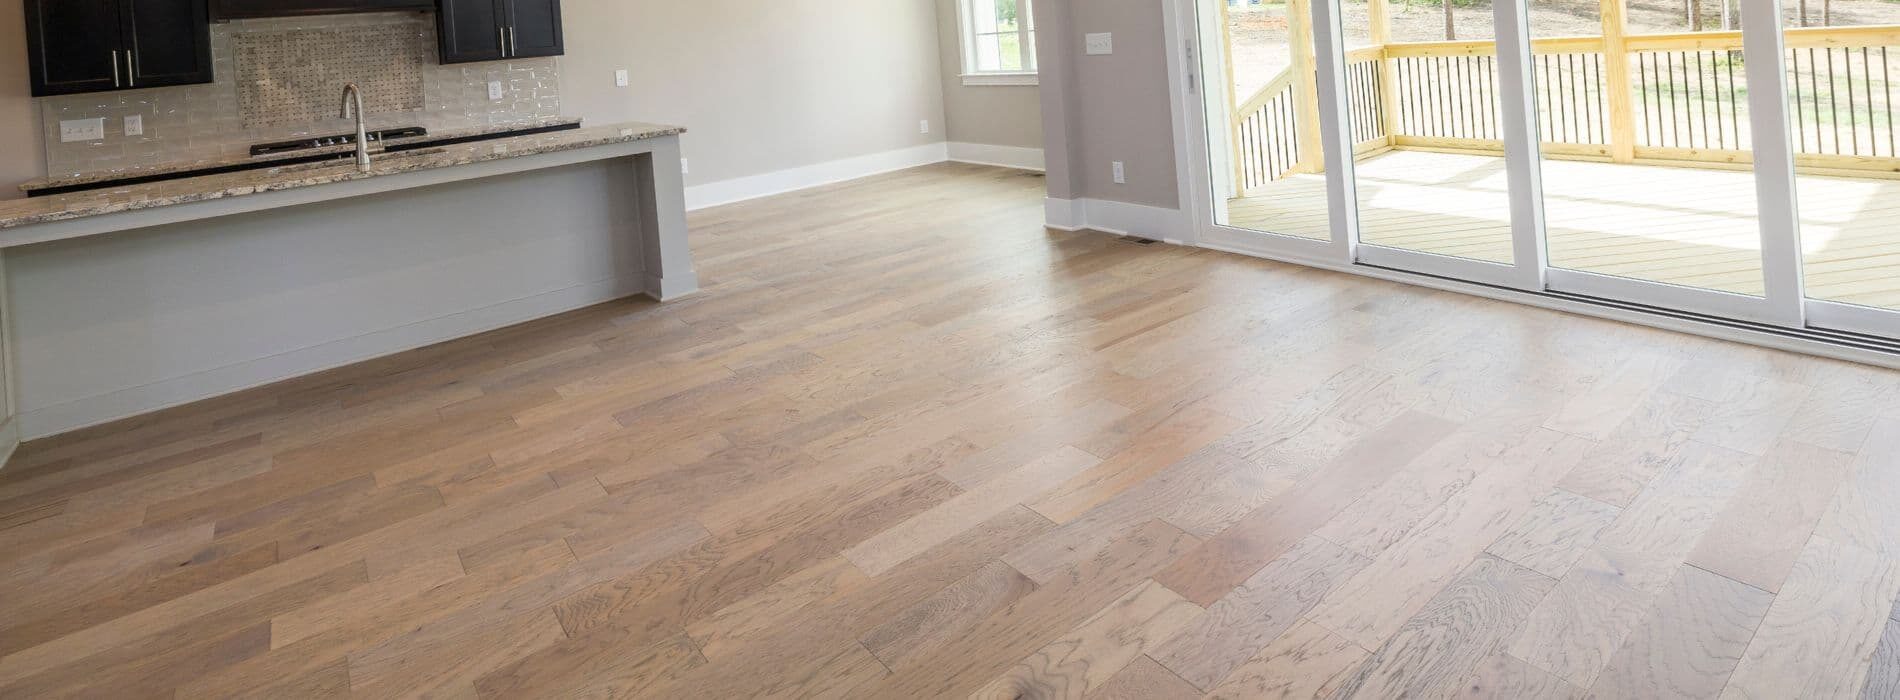 In Catford, floor sanding professionals have successfully restored 9-year-old engineered oak floors with a 3.5 mm top layer, by applying a mid-oak stain and finishing with four coats of Junckers Strong in a satin finish.